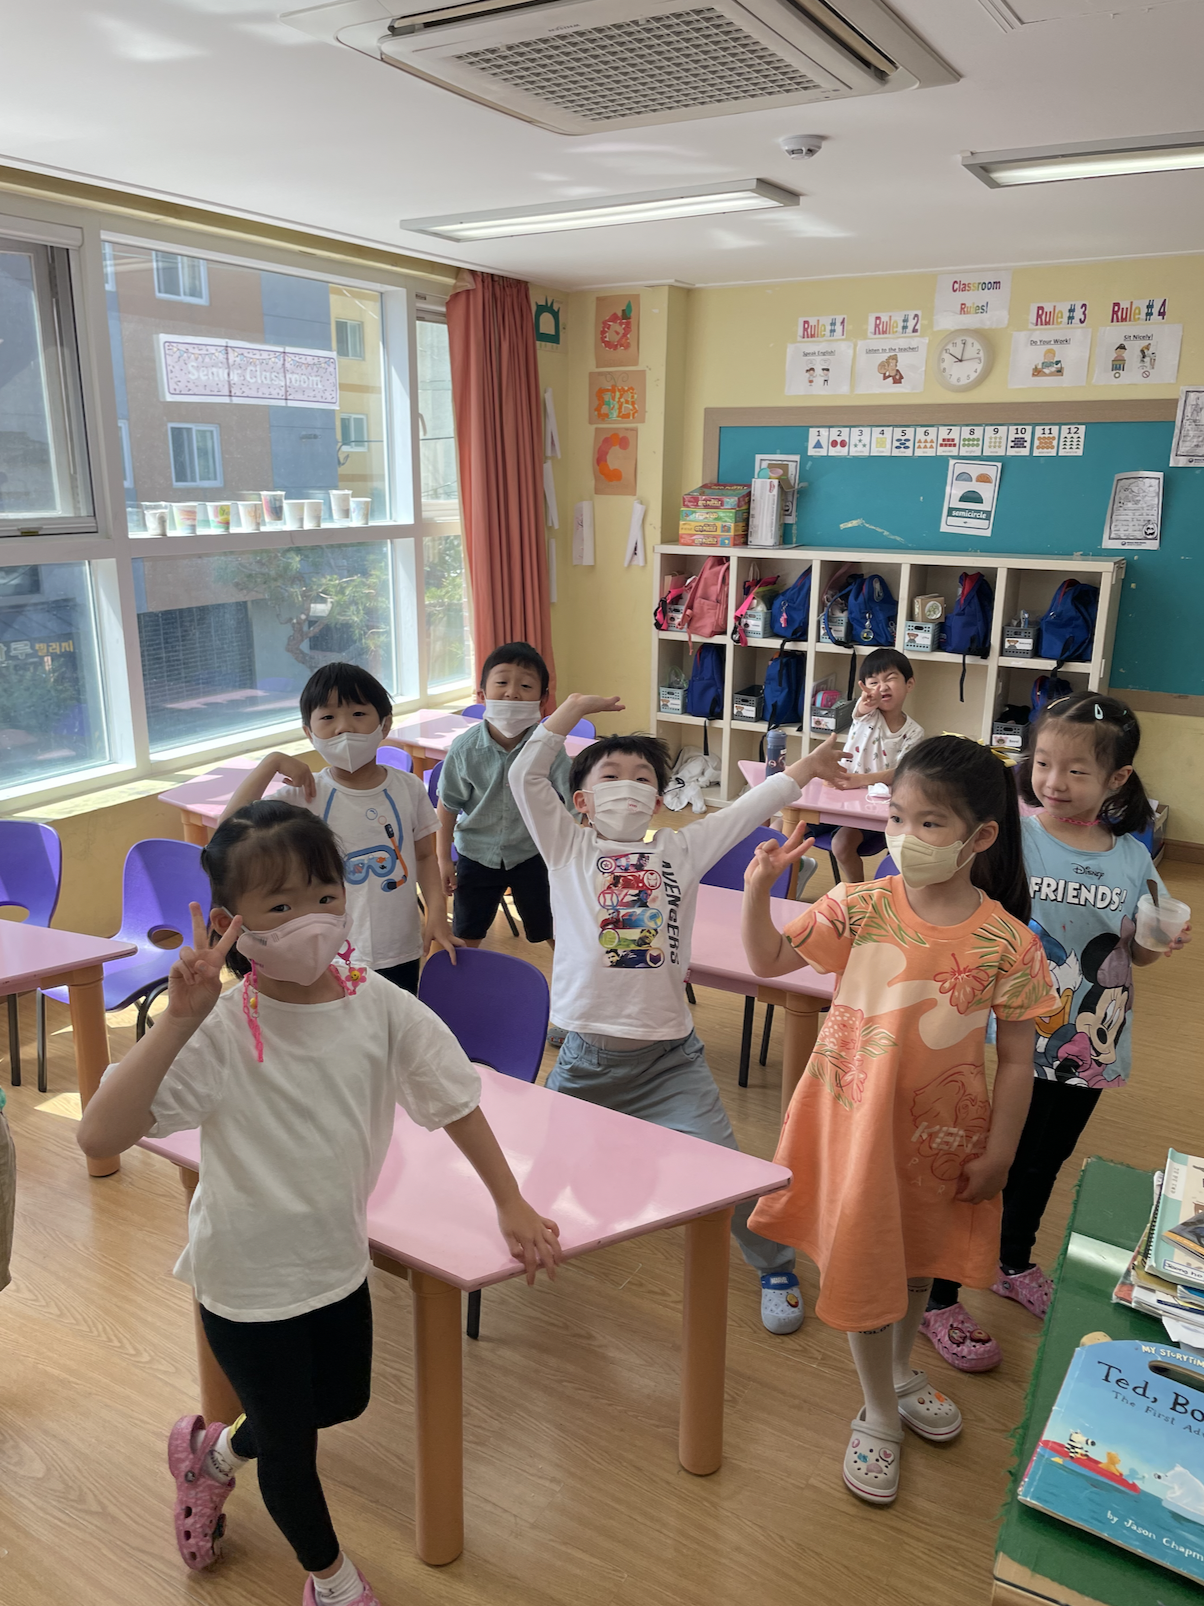 Is Teaching English in South Korea Worth It in 2022?